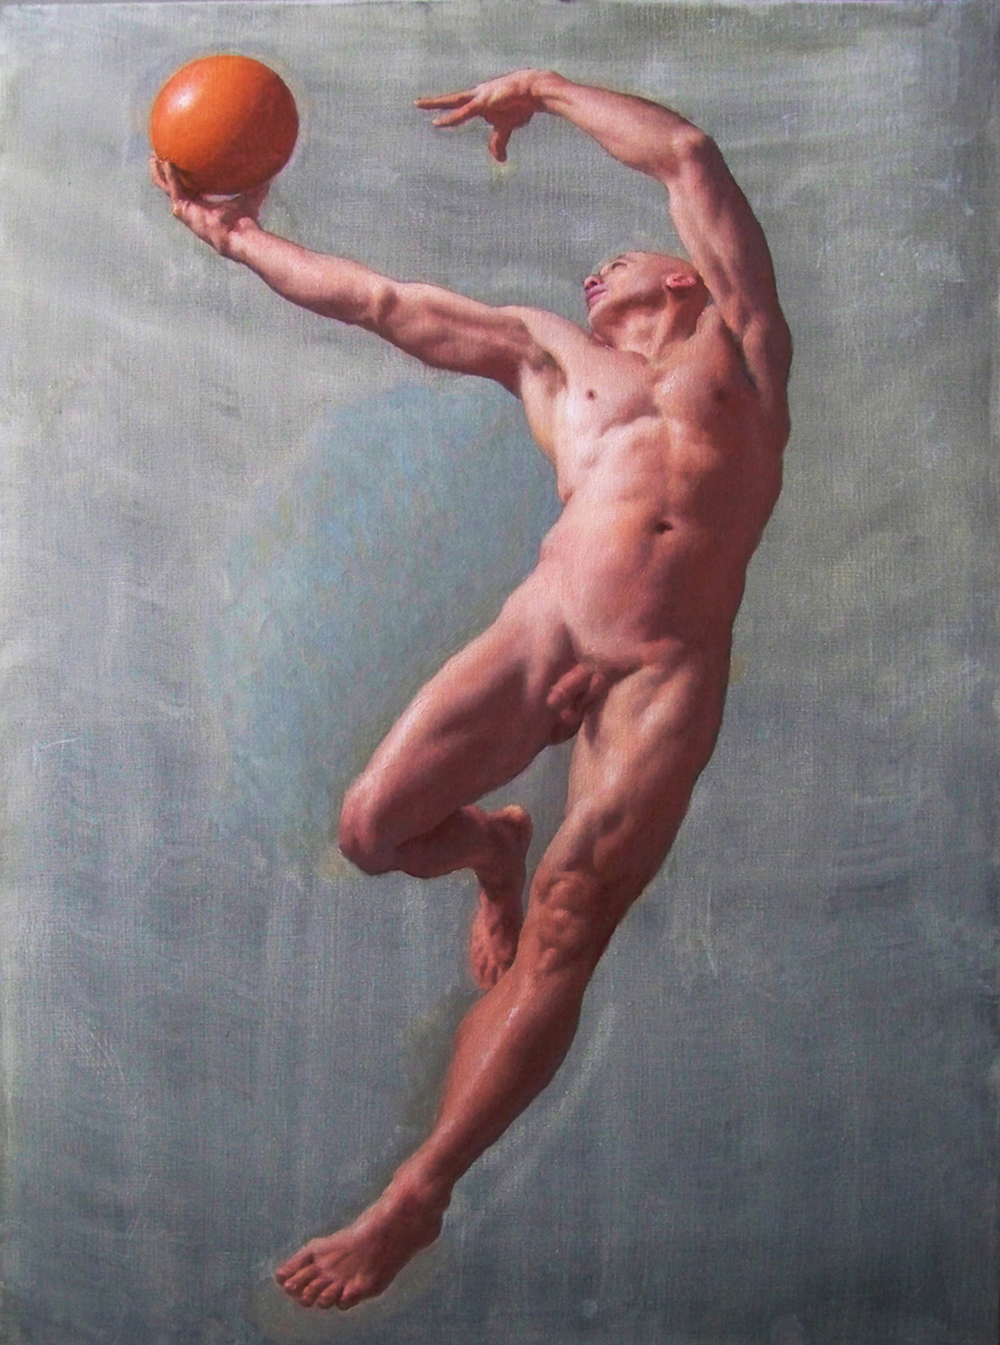 Soaring, 2012, oil on canvas, 36x24 inches